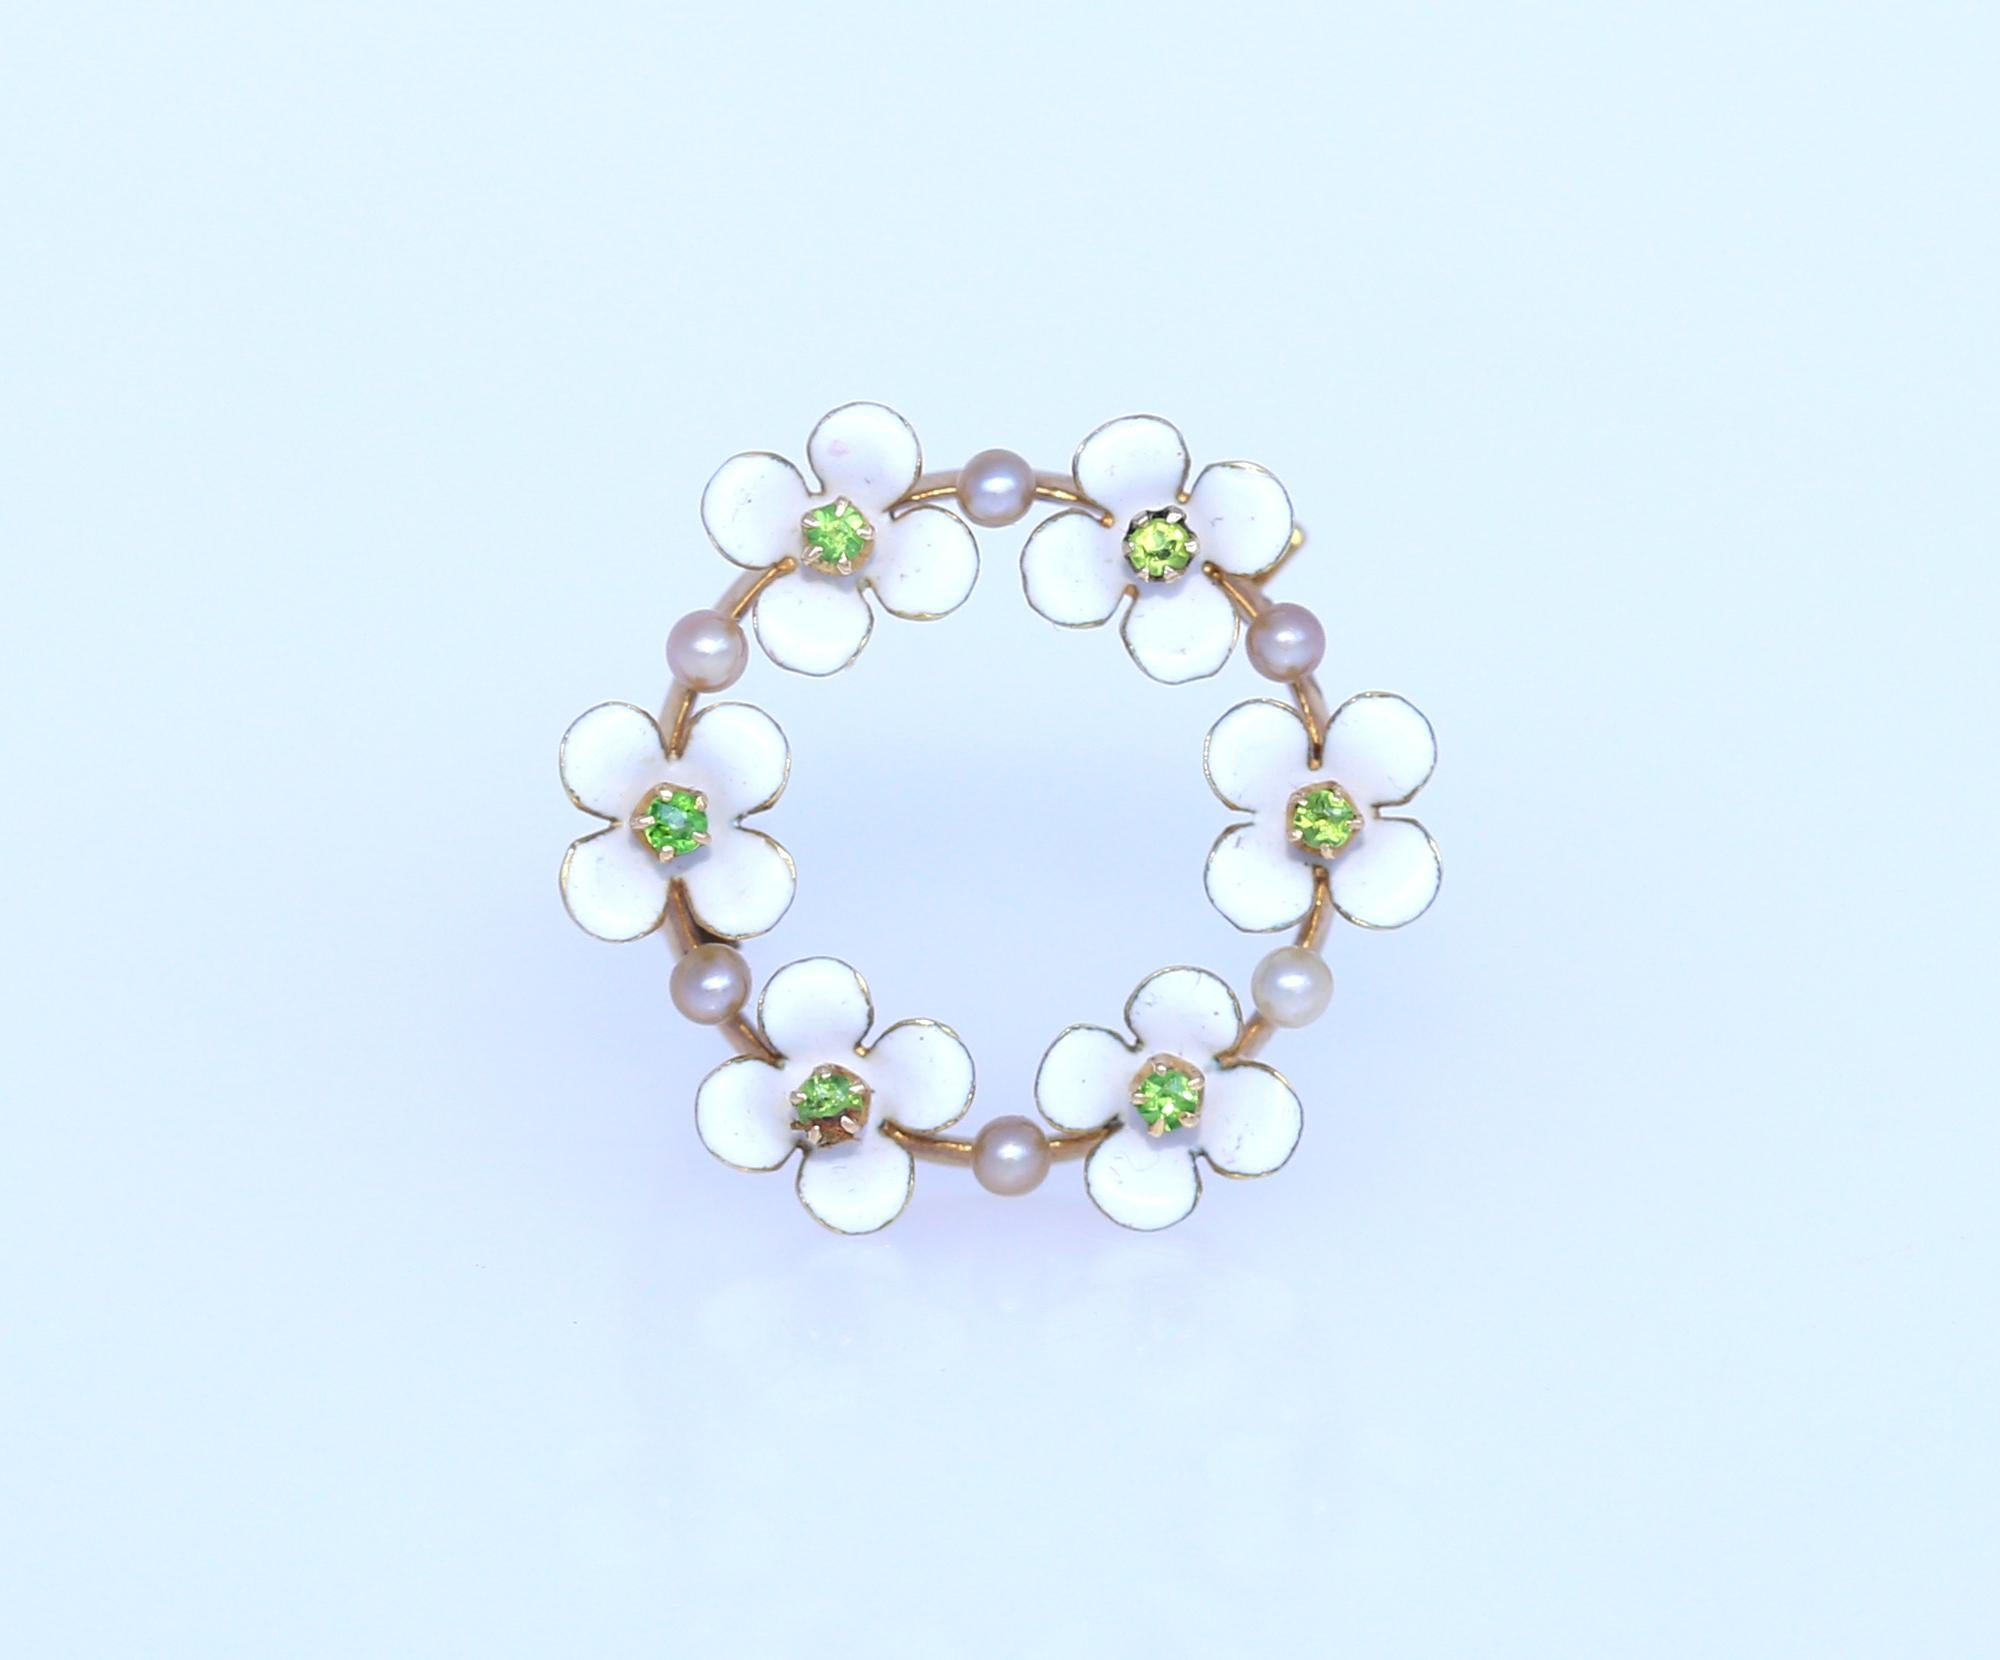 14K Gold White Enamel flowers with Peridot and Pearls a true Art Nouveau brooch. Europe 1920.
Once it was common to communicate a message via pin or brooch. Nowadays this art is lost, but we can surely start a new tradition. White flowers and green